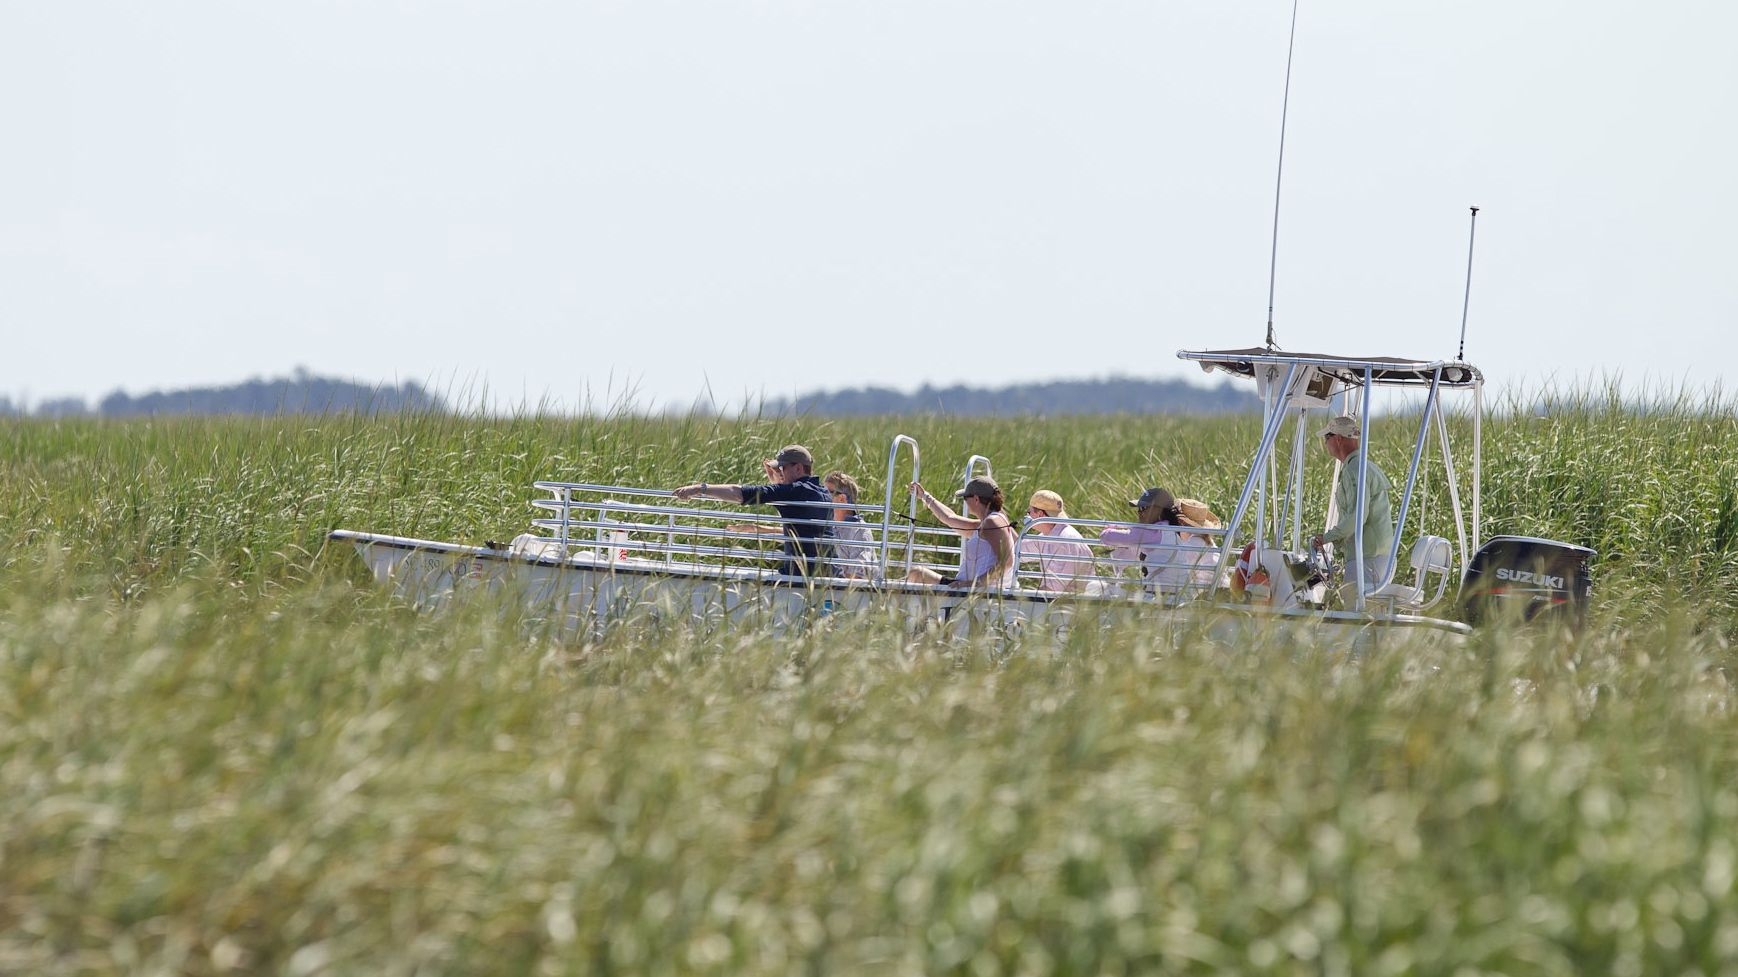 Explore the Lowcountry salt marsh on a private adventure